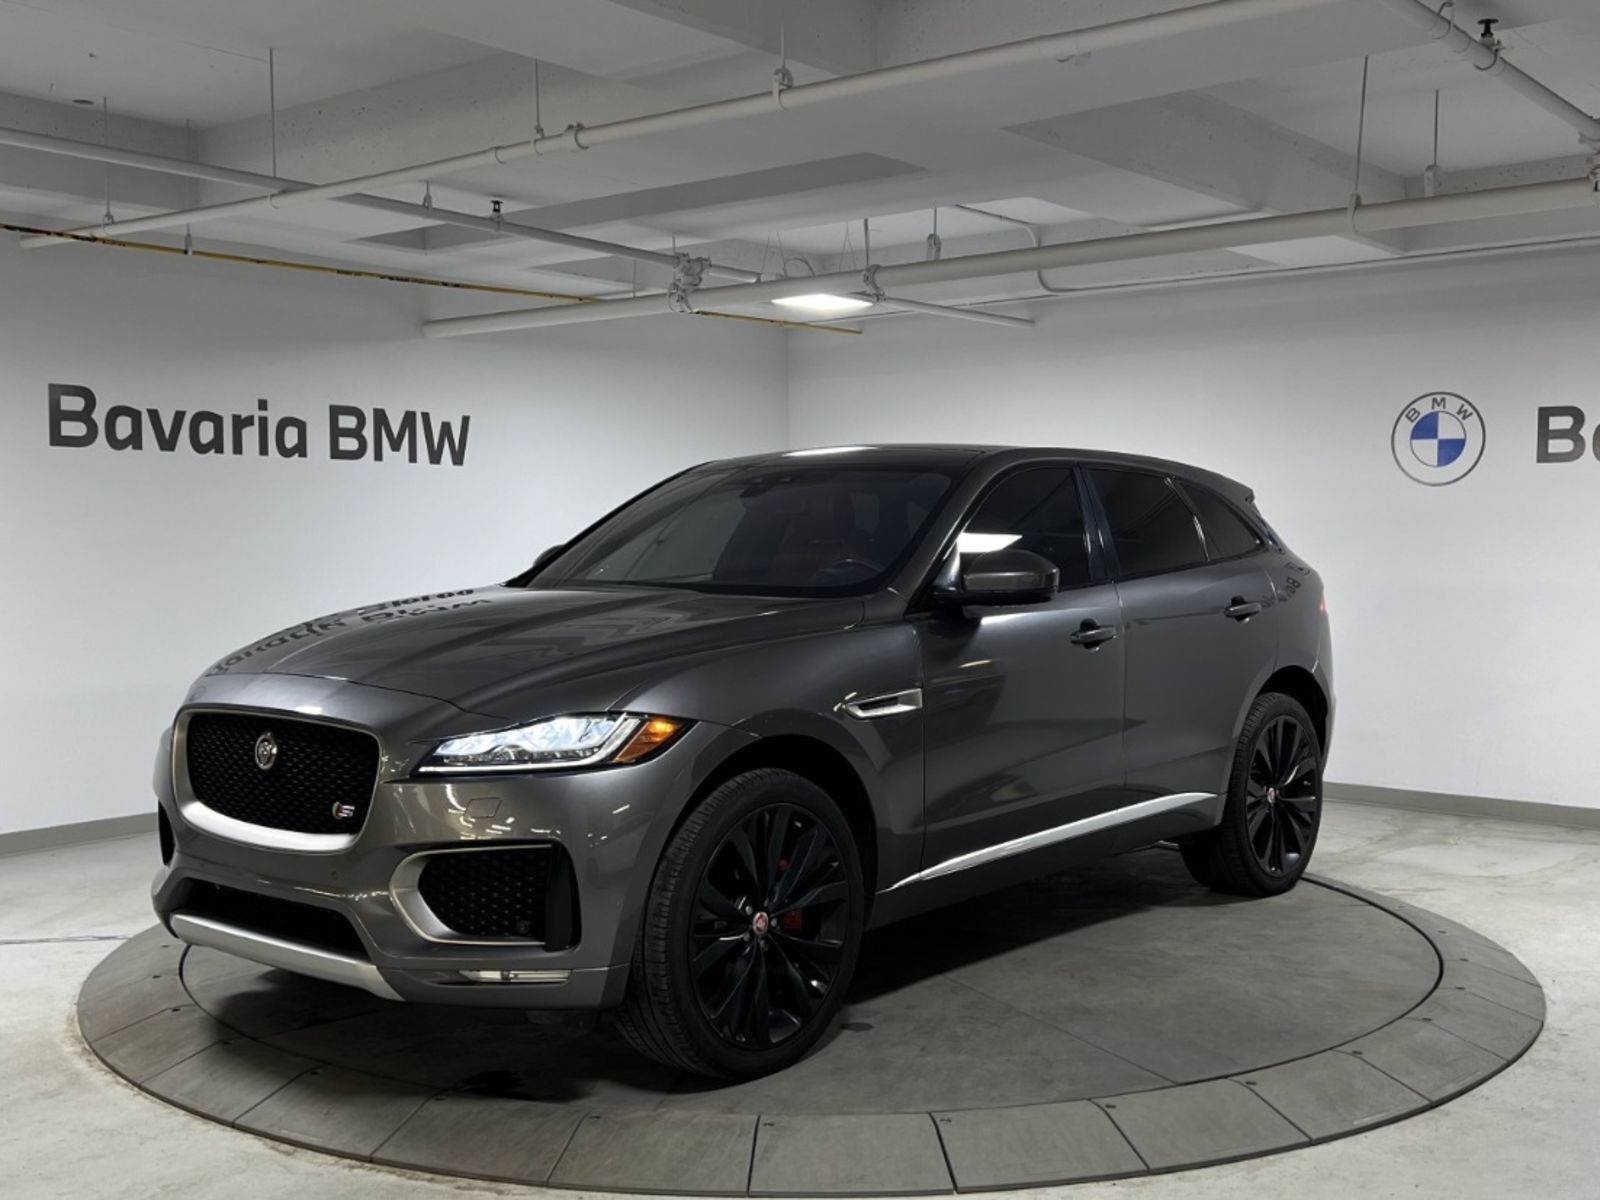 2018 Jaguar F-Pace S | Leather Seats | Heated & Cooled Seats | Pano S